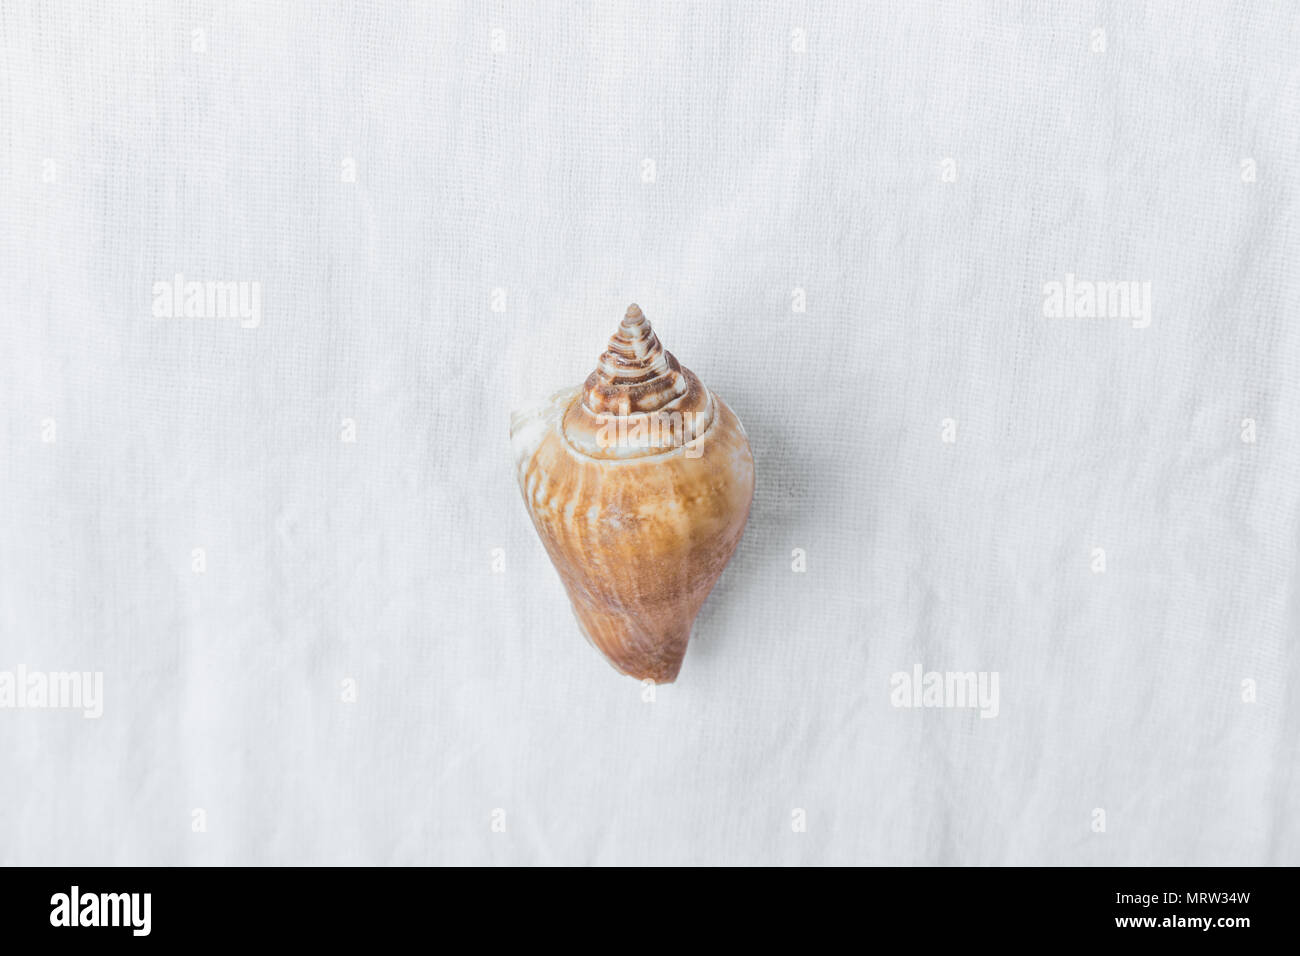 One Spiral Brown Beige Sea Shell on White Linen Fabric Background. Minimalist Modern Styled Stock Photo for Social Media Blog Product Promotion.Templa Stock Photo